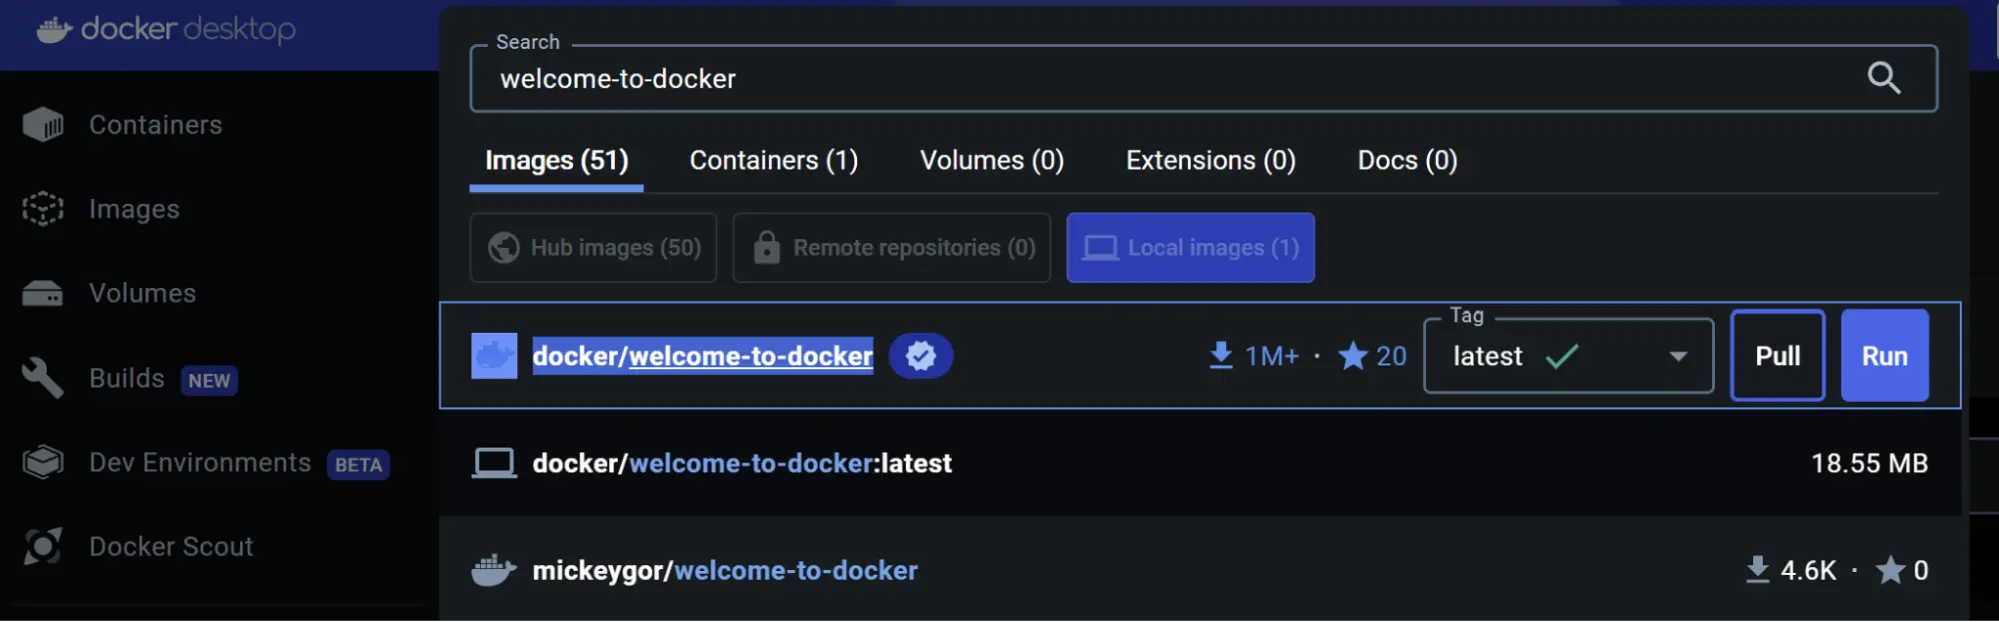 A screenshot of the Docker Dashboard showing the search result for welcome-to-docker Docker image 